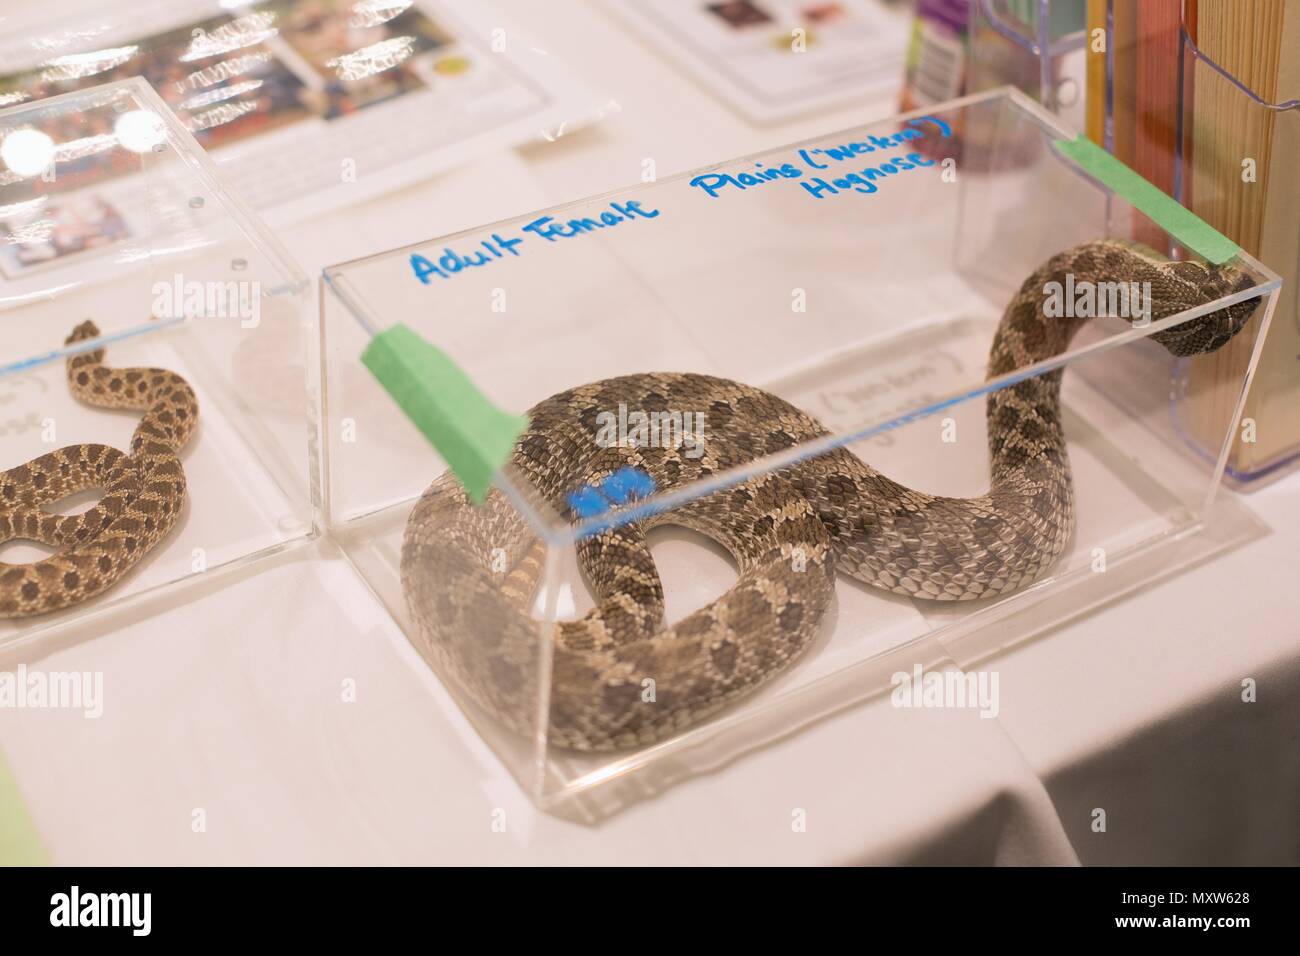 An adult female plains western hognose snake, on display at an exotic reptiles show. Stock Photo